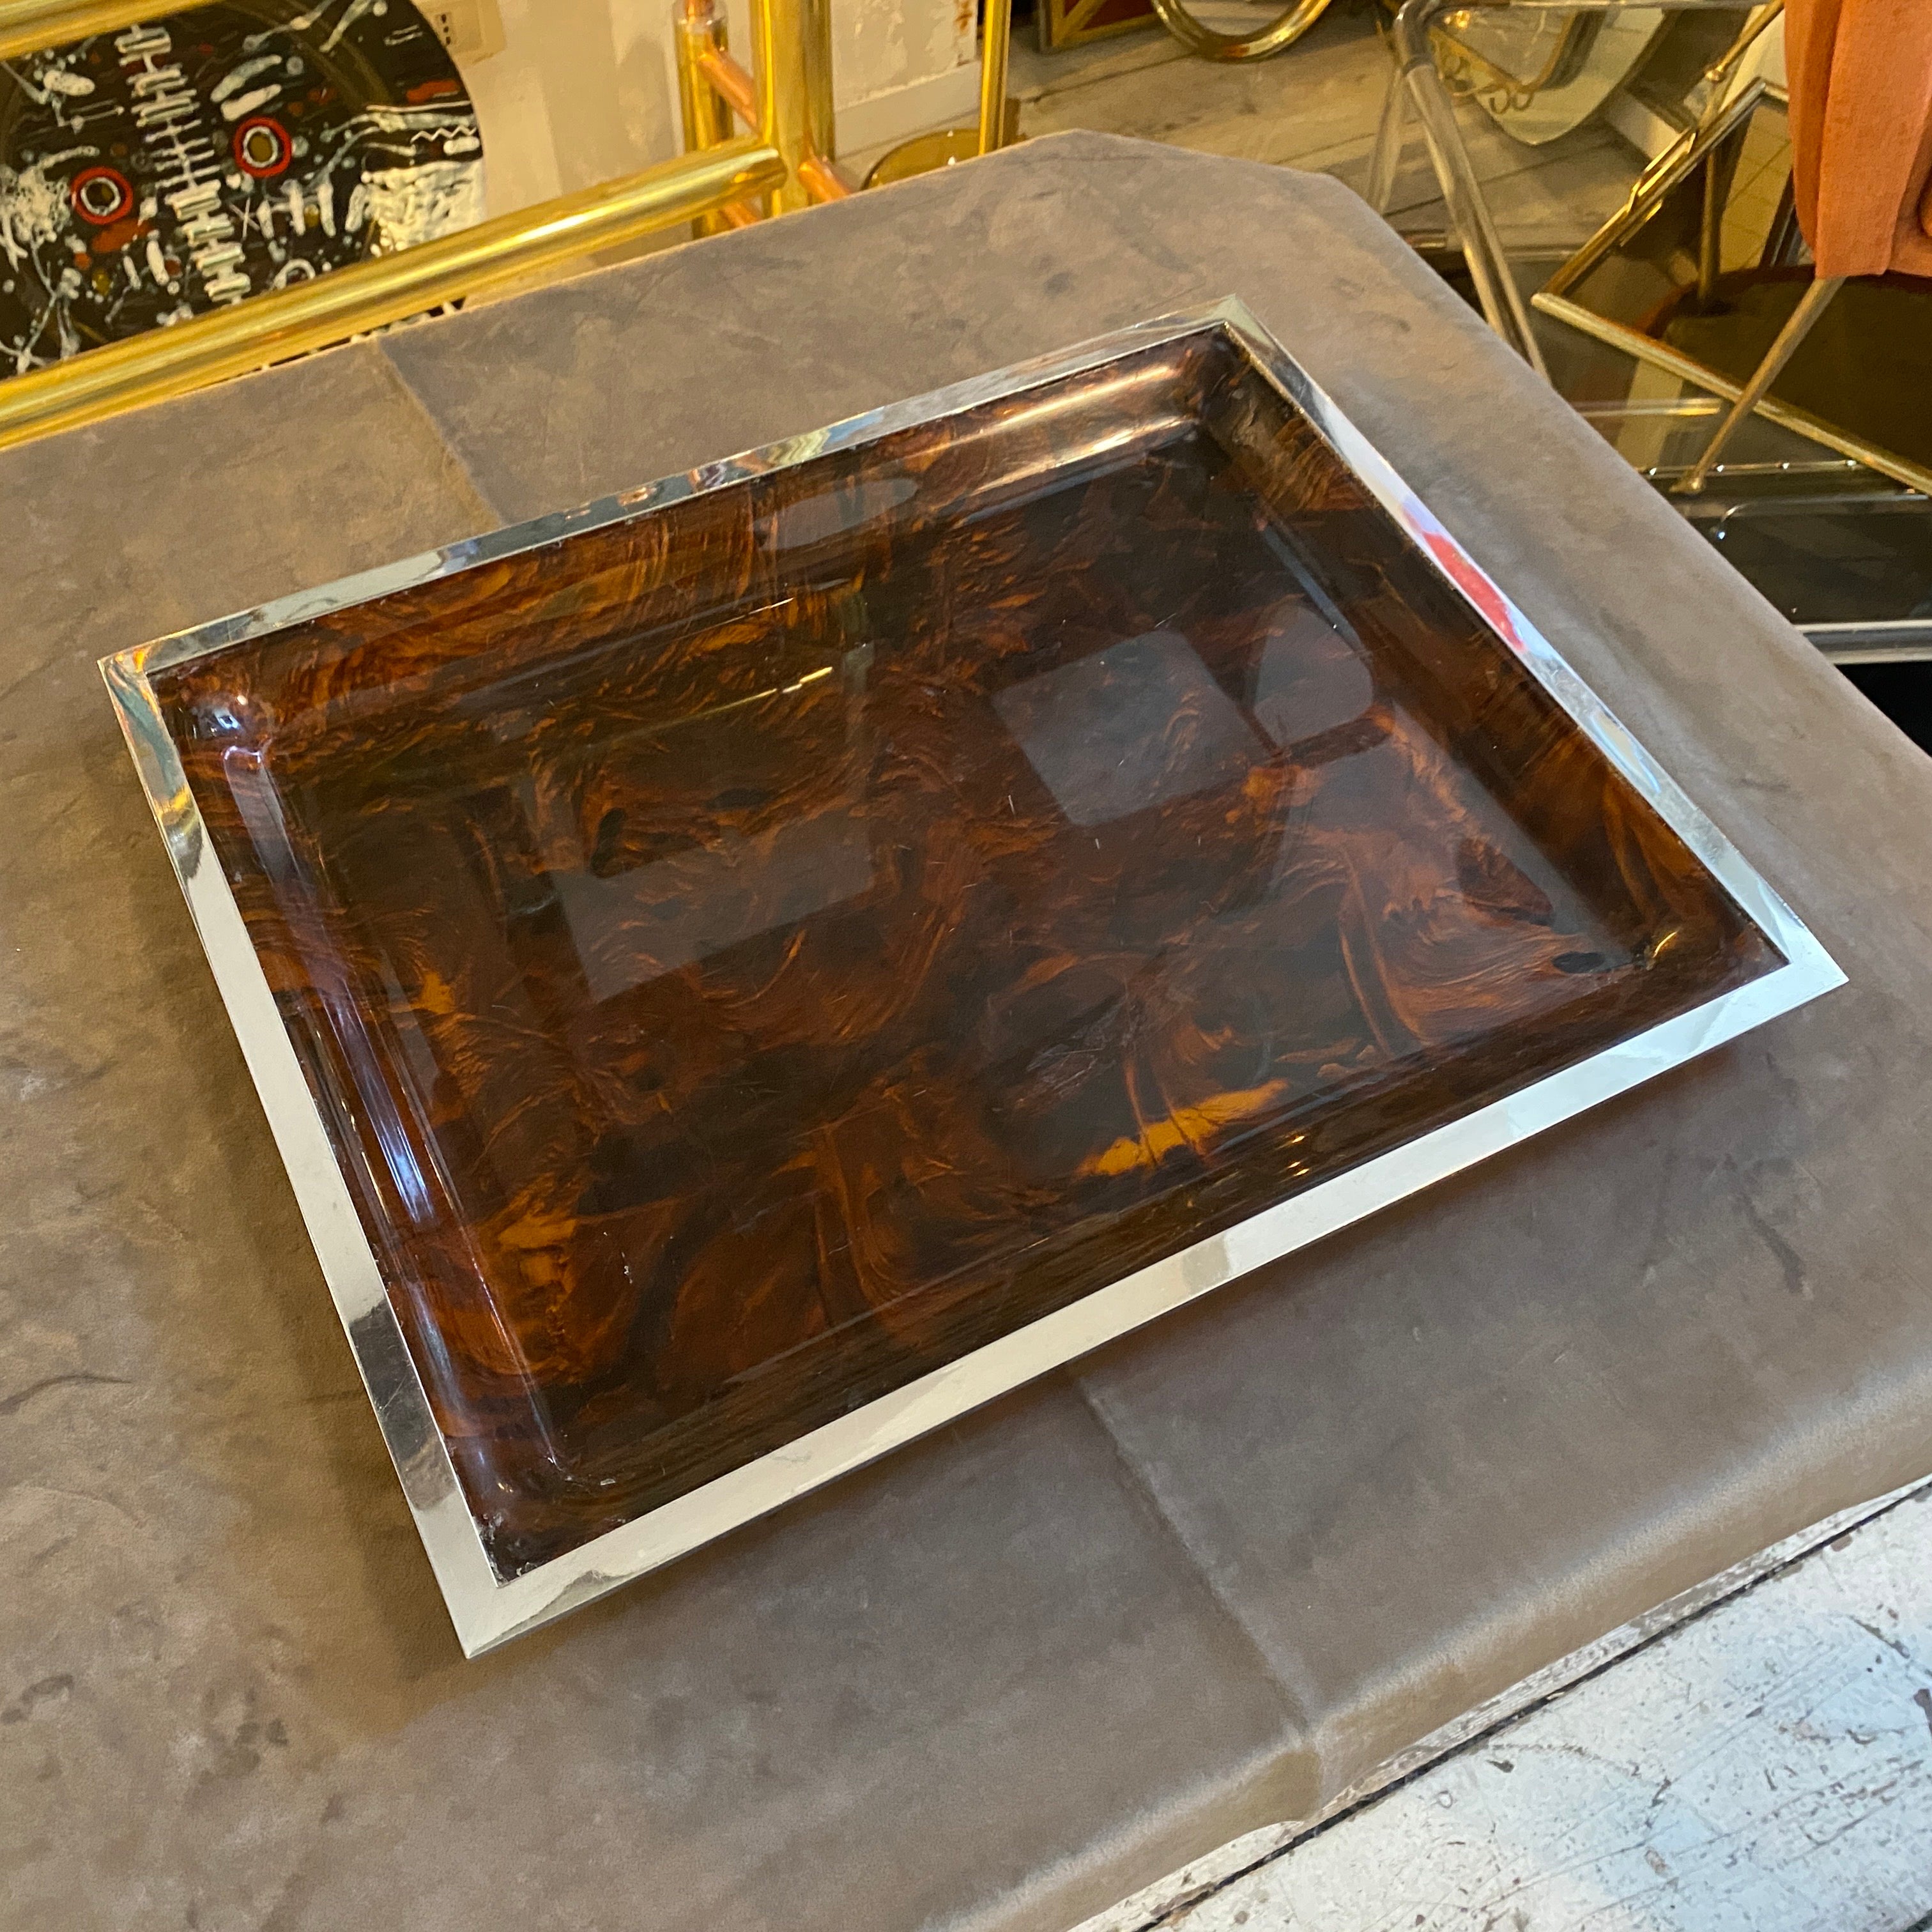 The rectangular tray features a modernist design and is made from lucite and silver-plated metal frame. The lucite it has been designed to resemble tortoise shell, which was a popular material in the Eighties. It's in very good conditions. Lucite is